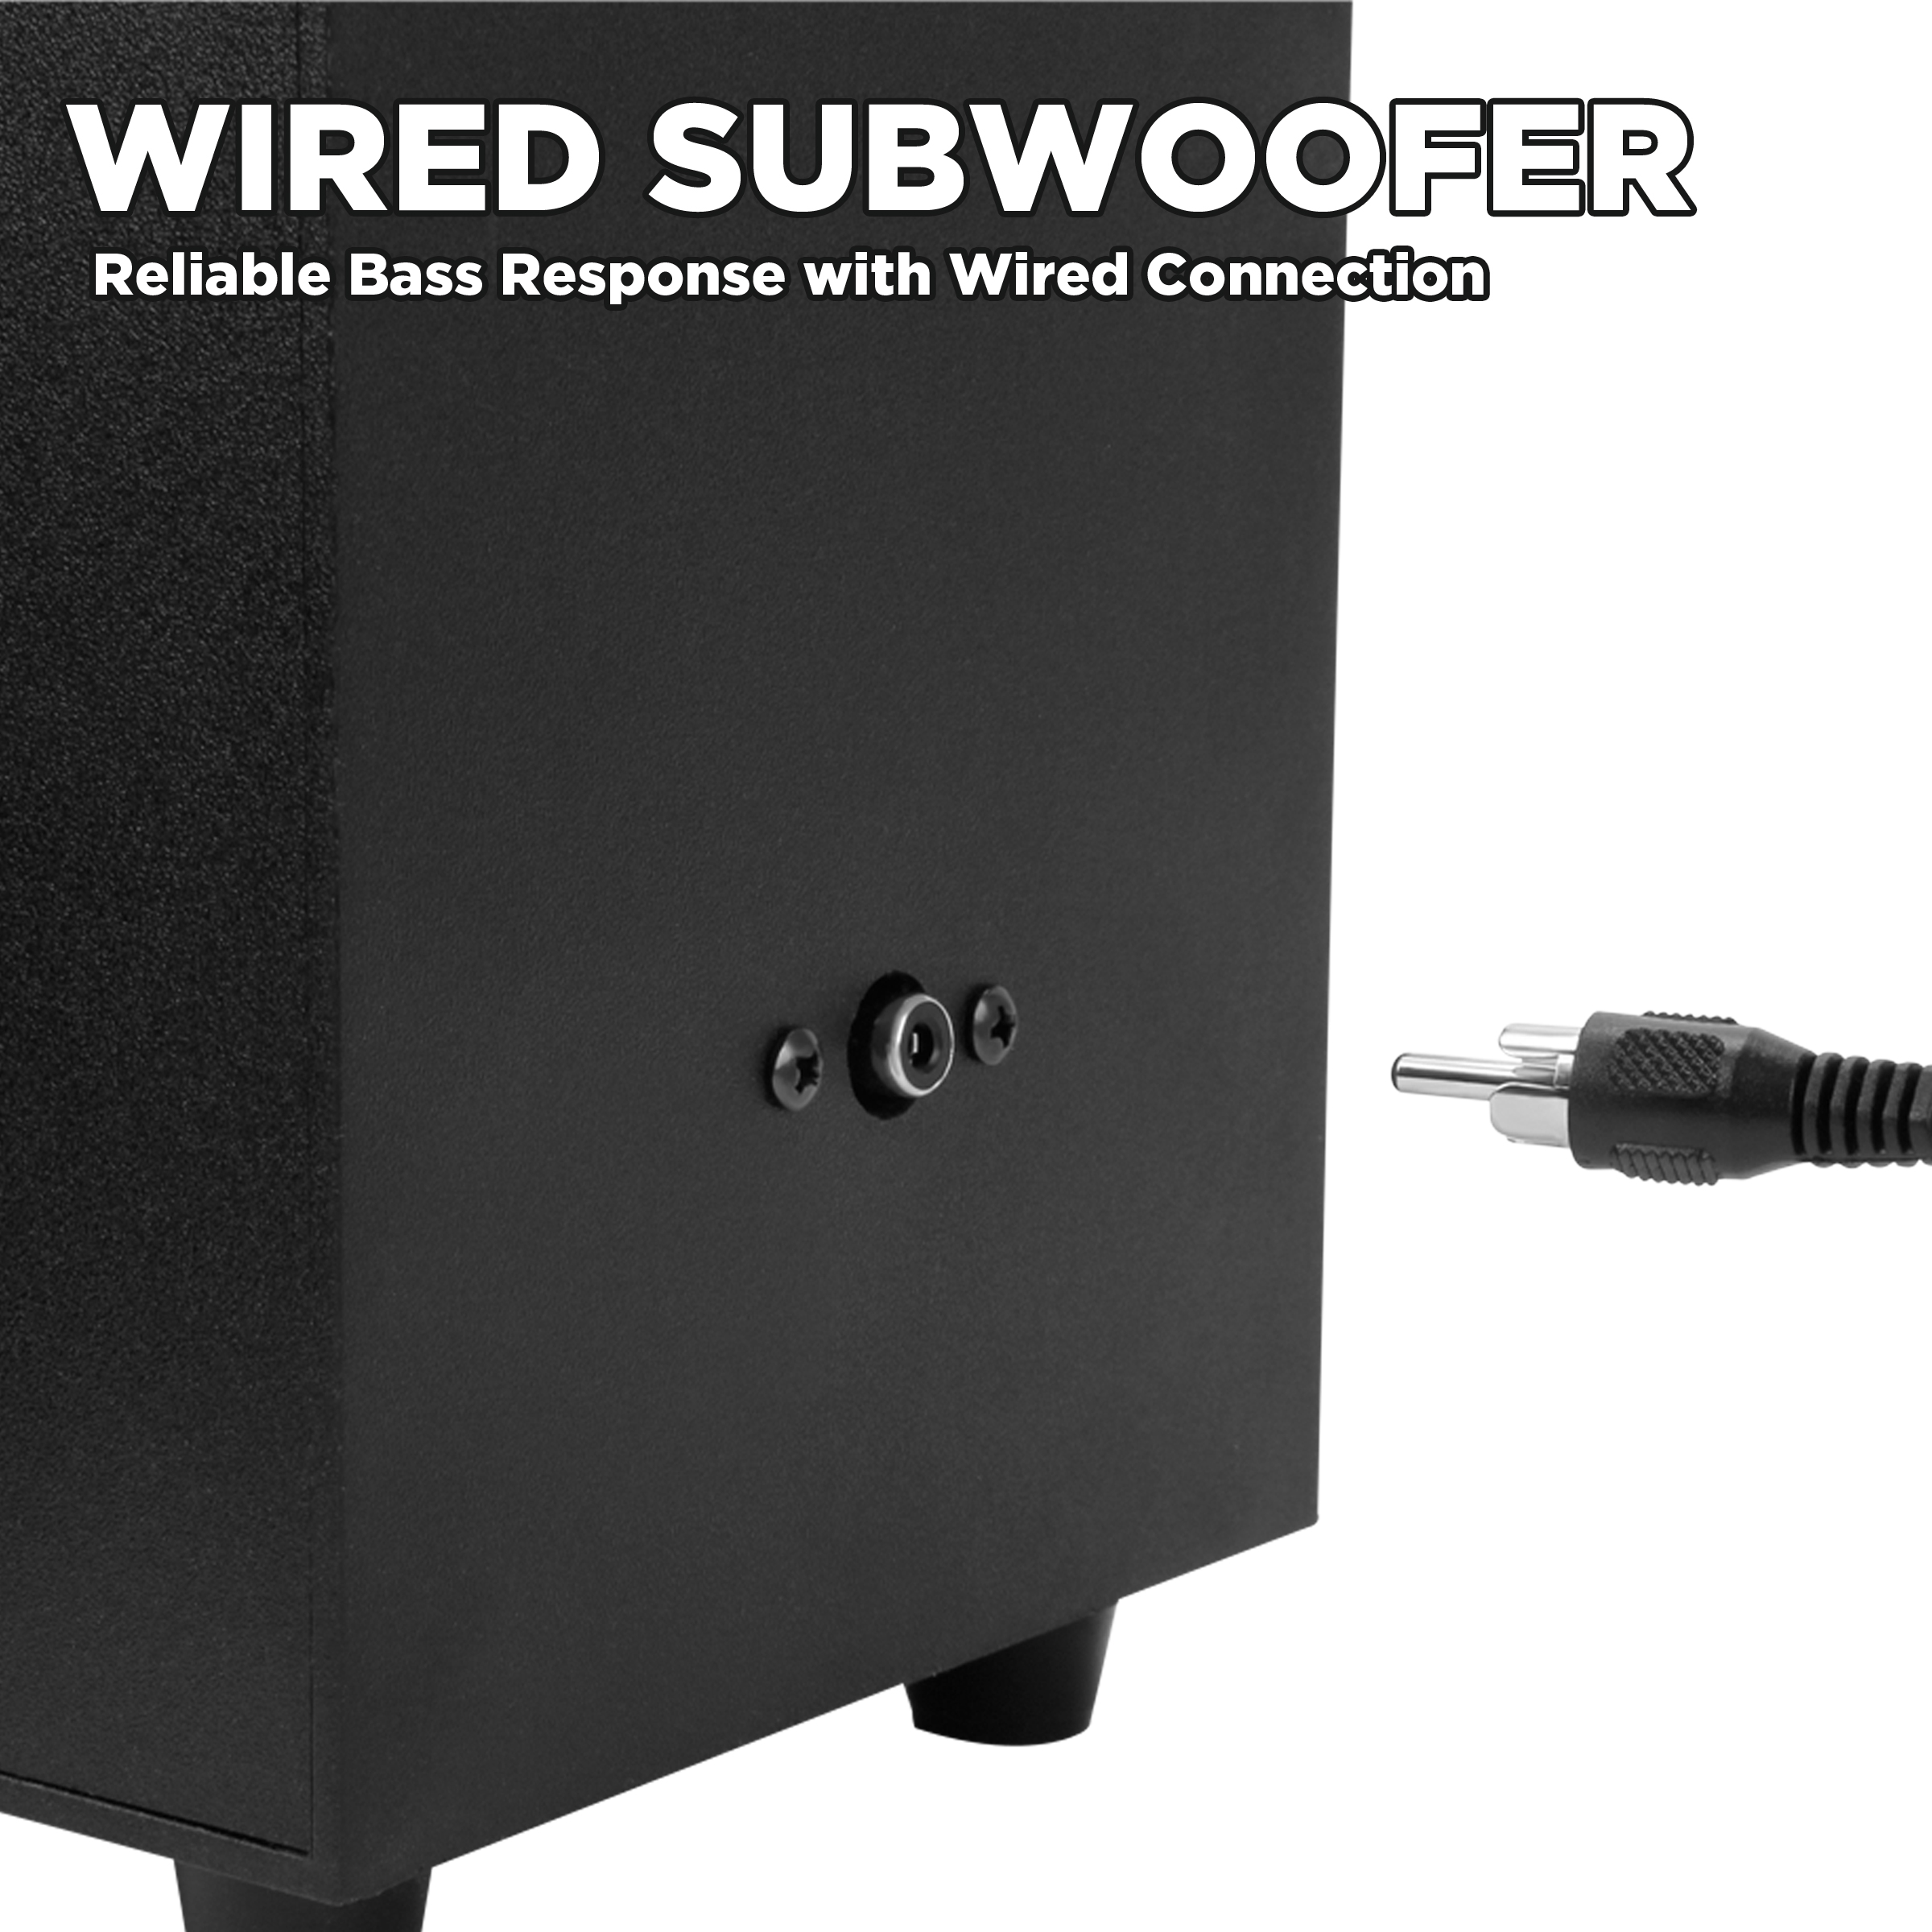 GOgroove SonaVERSE UTR USB Powered 2.1 Computer Speaker Sound Bar and Wired Subwoofer (Blackout) - image 5 of 9